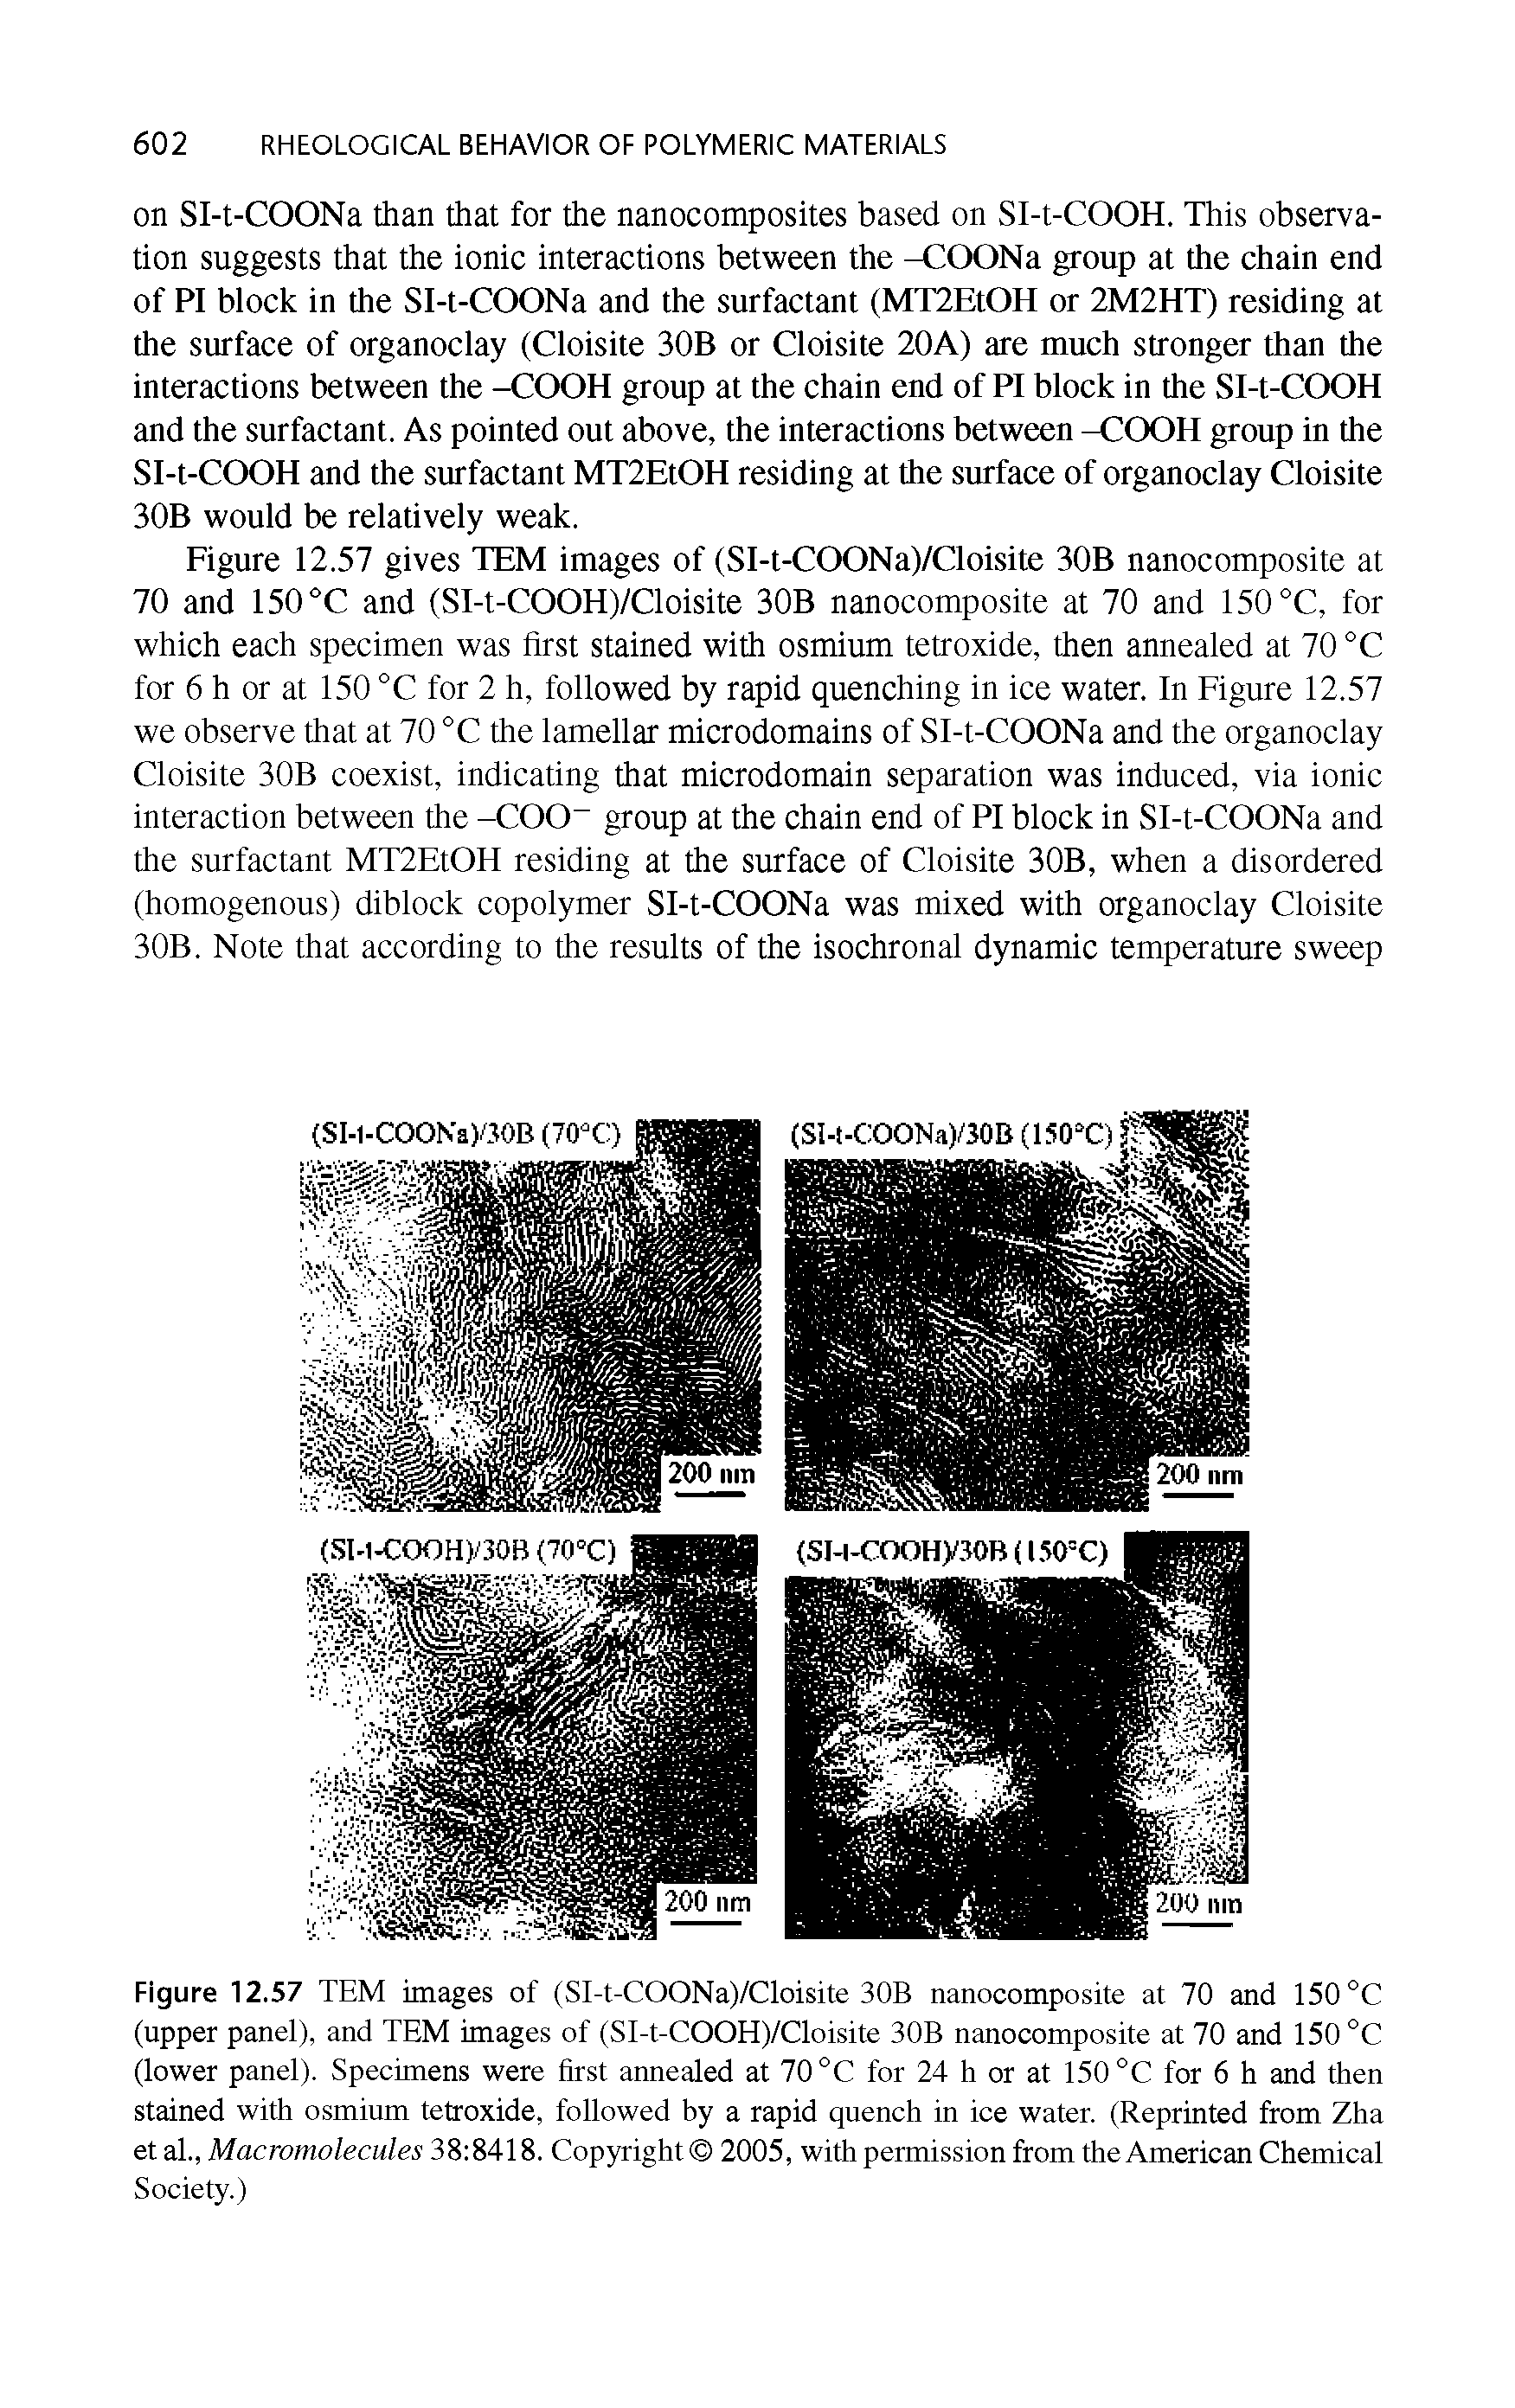 Figure 12.57 TEM images of (SI-t-COONa)/Cloisite 30B nanocomposite at 70 and 150 °C (upper panel), and TEM images of (SI-t-COOH)/Cloisite 30B nanocomposite at 70 and 150 °C (lower panel). Specimens were first annealed at 70 °C for 24 h or at 150 for 6 h and then stained with osmium tetroxide, followed by a rapid quench in ice water. (Reprinted from Zha et al.. Macromolecules 38 8418. Copyright 2005, with permission from the American Chemical Society.)...